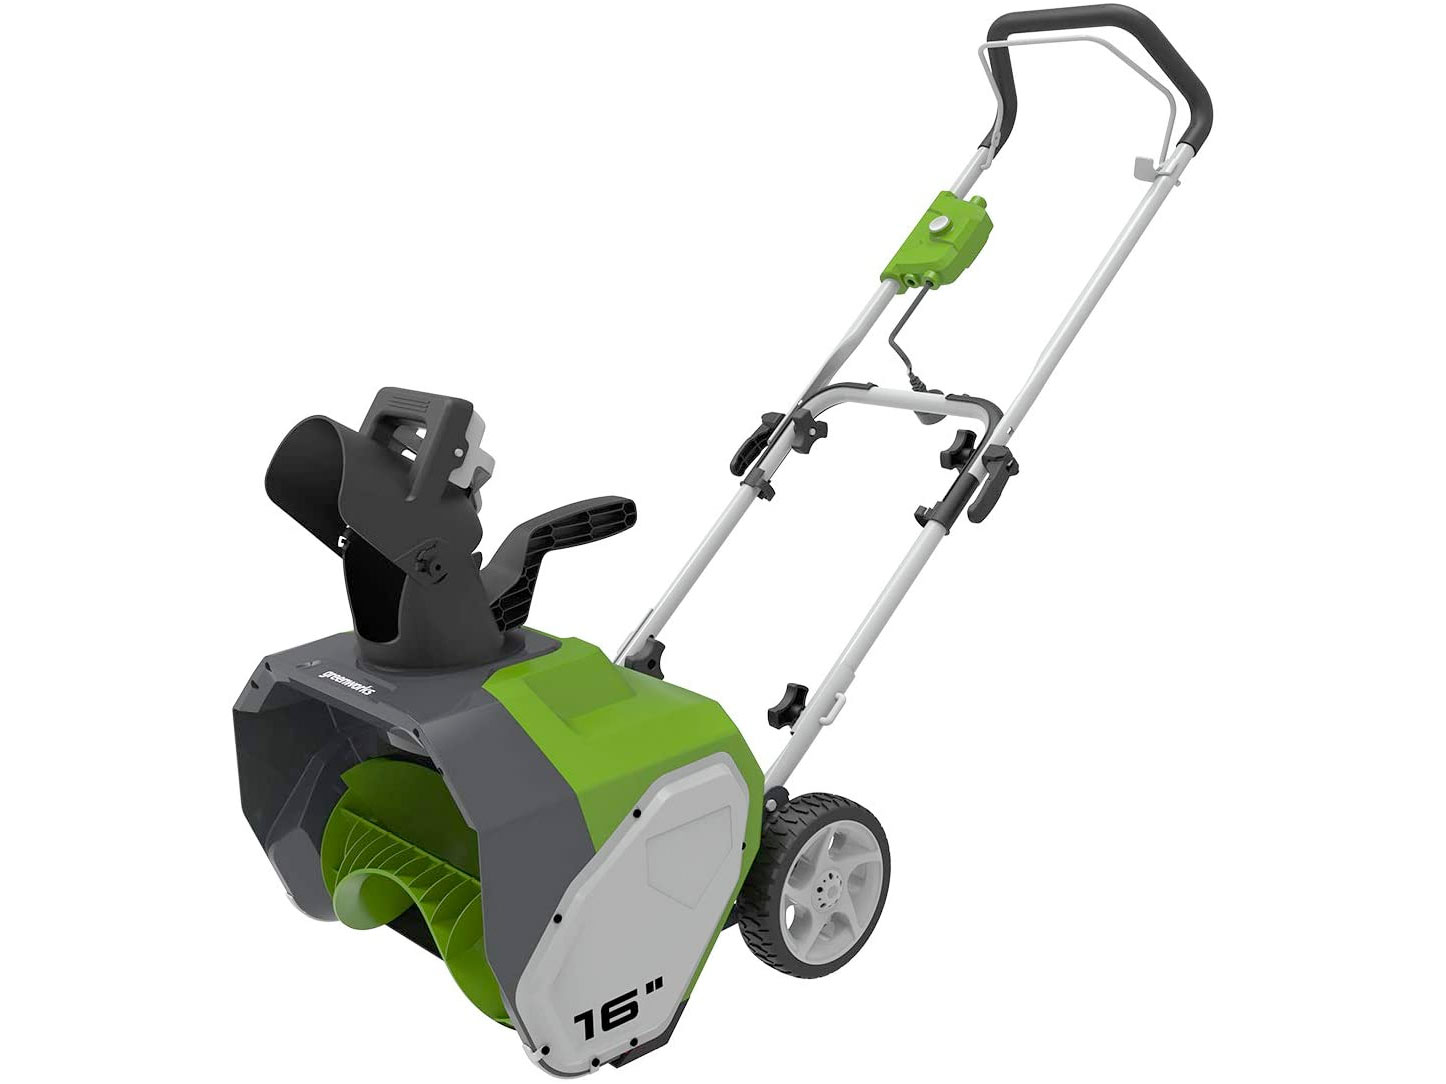 Amazon：Greenworks 10 Amp 16-Inch Corded Snow Thrower只卖$129